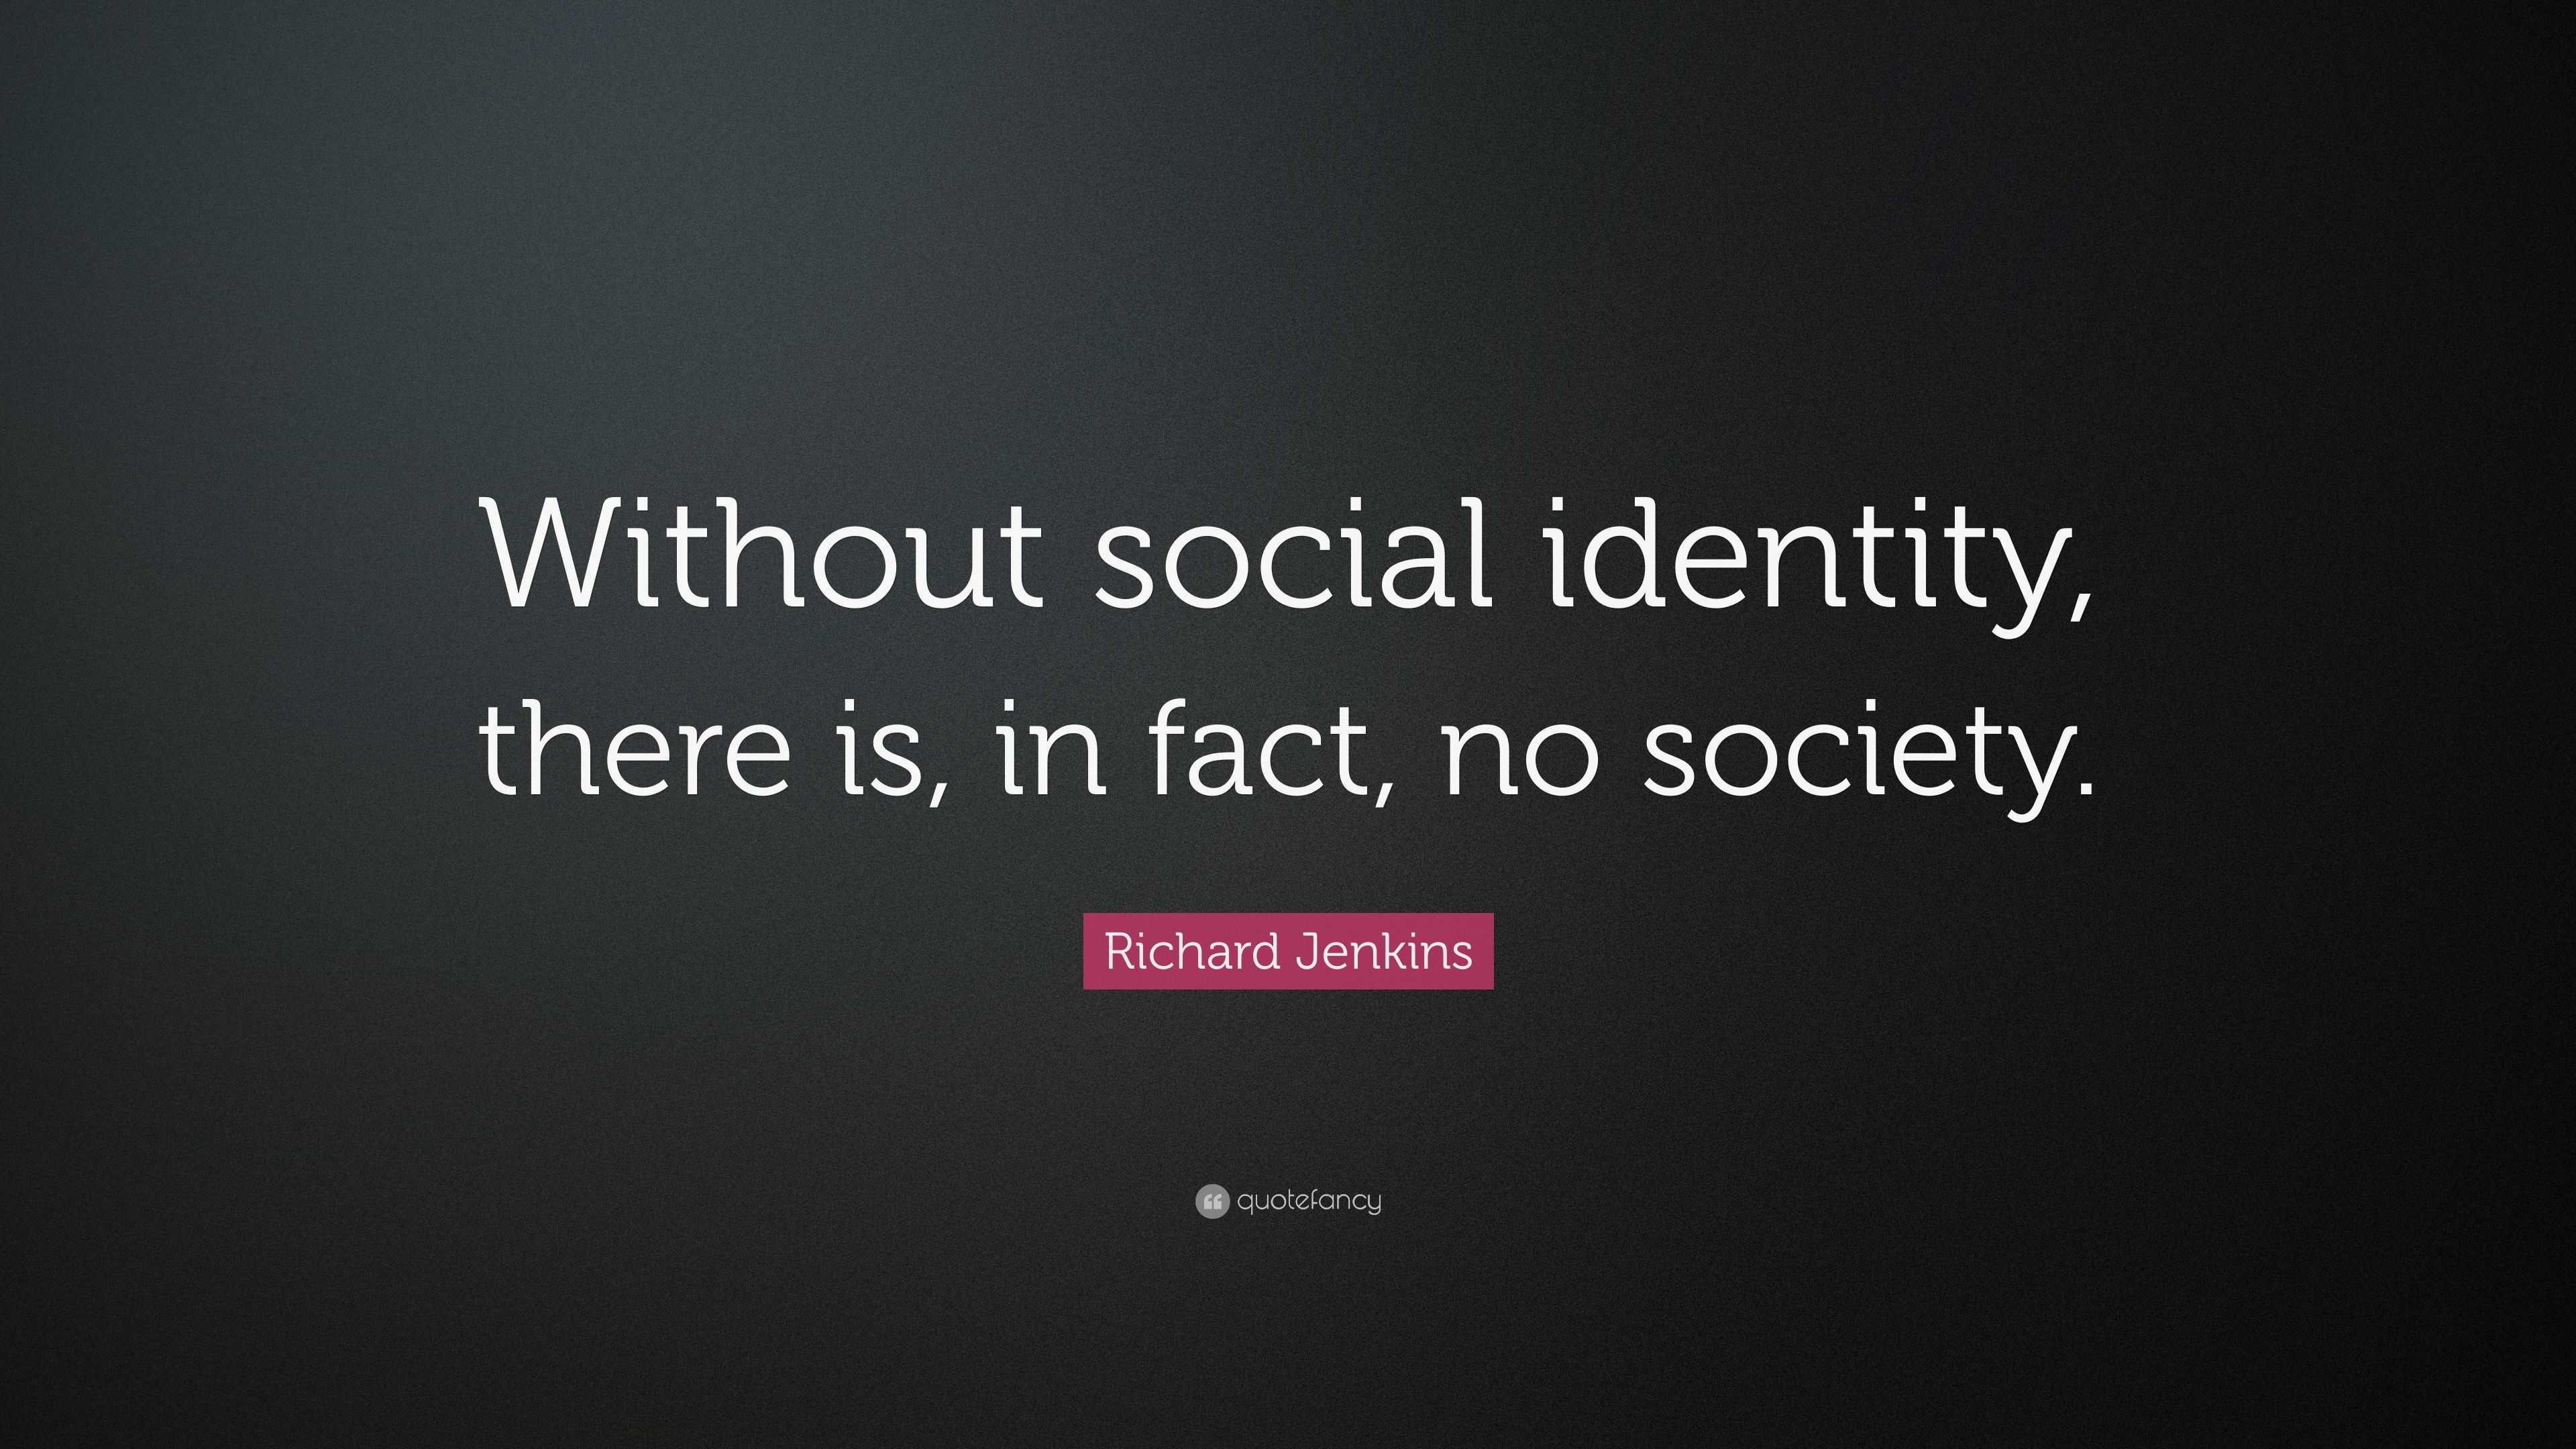 Richard Jenkins Quote: “Without social identity, there is, in fact, no